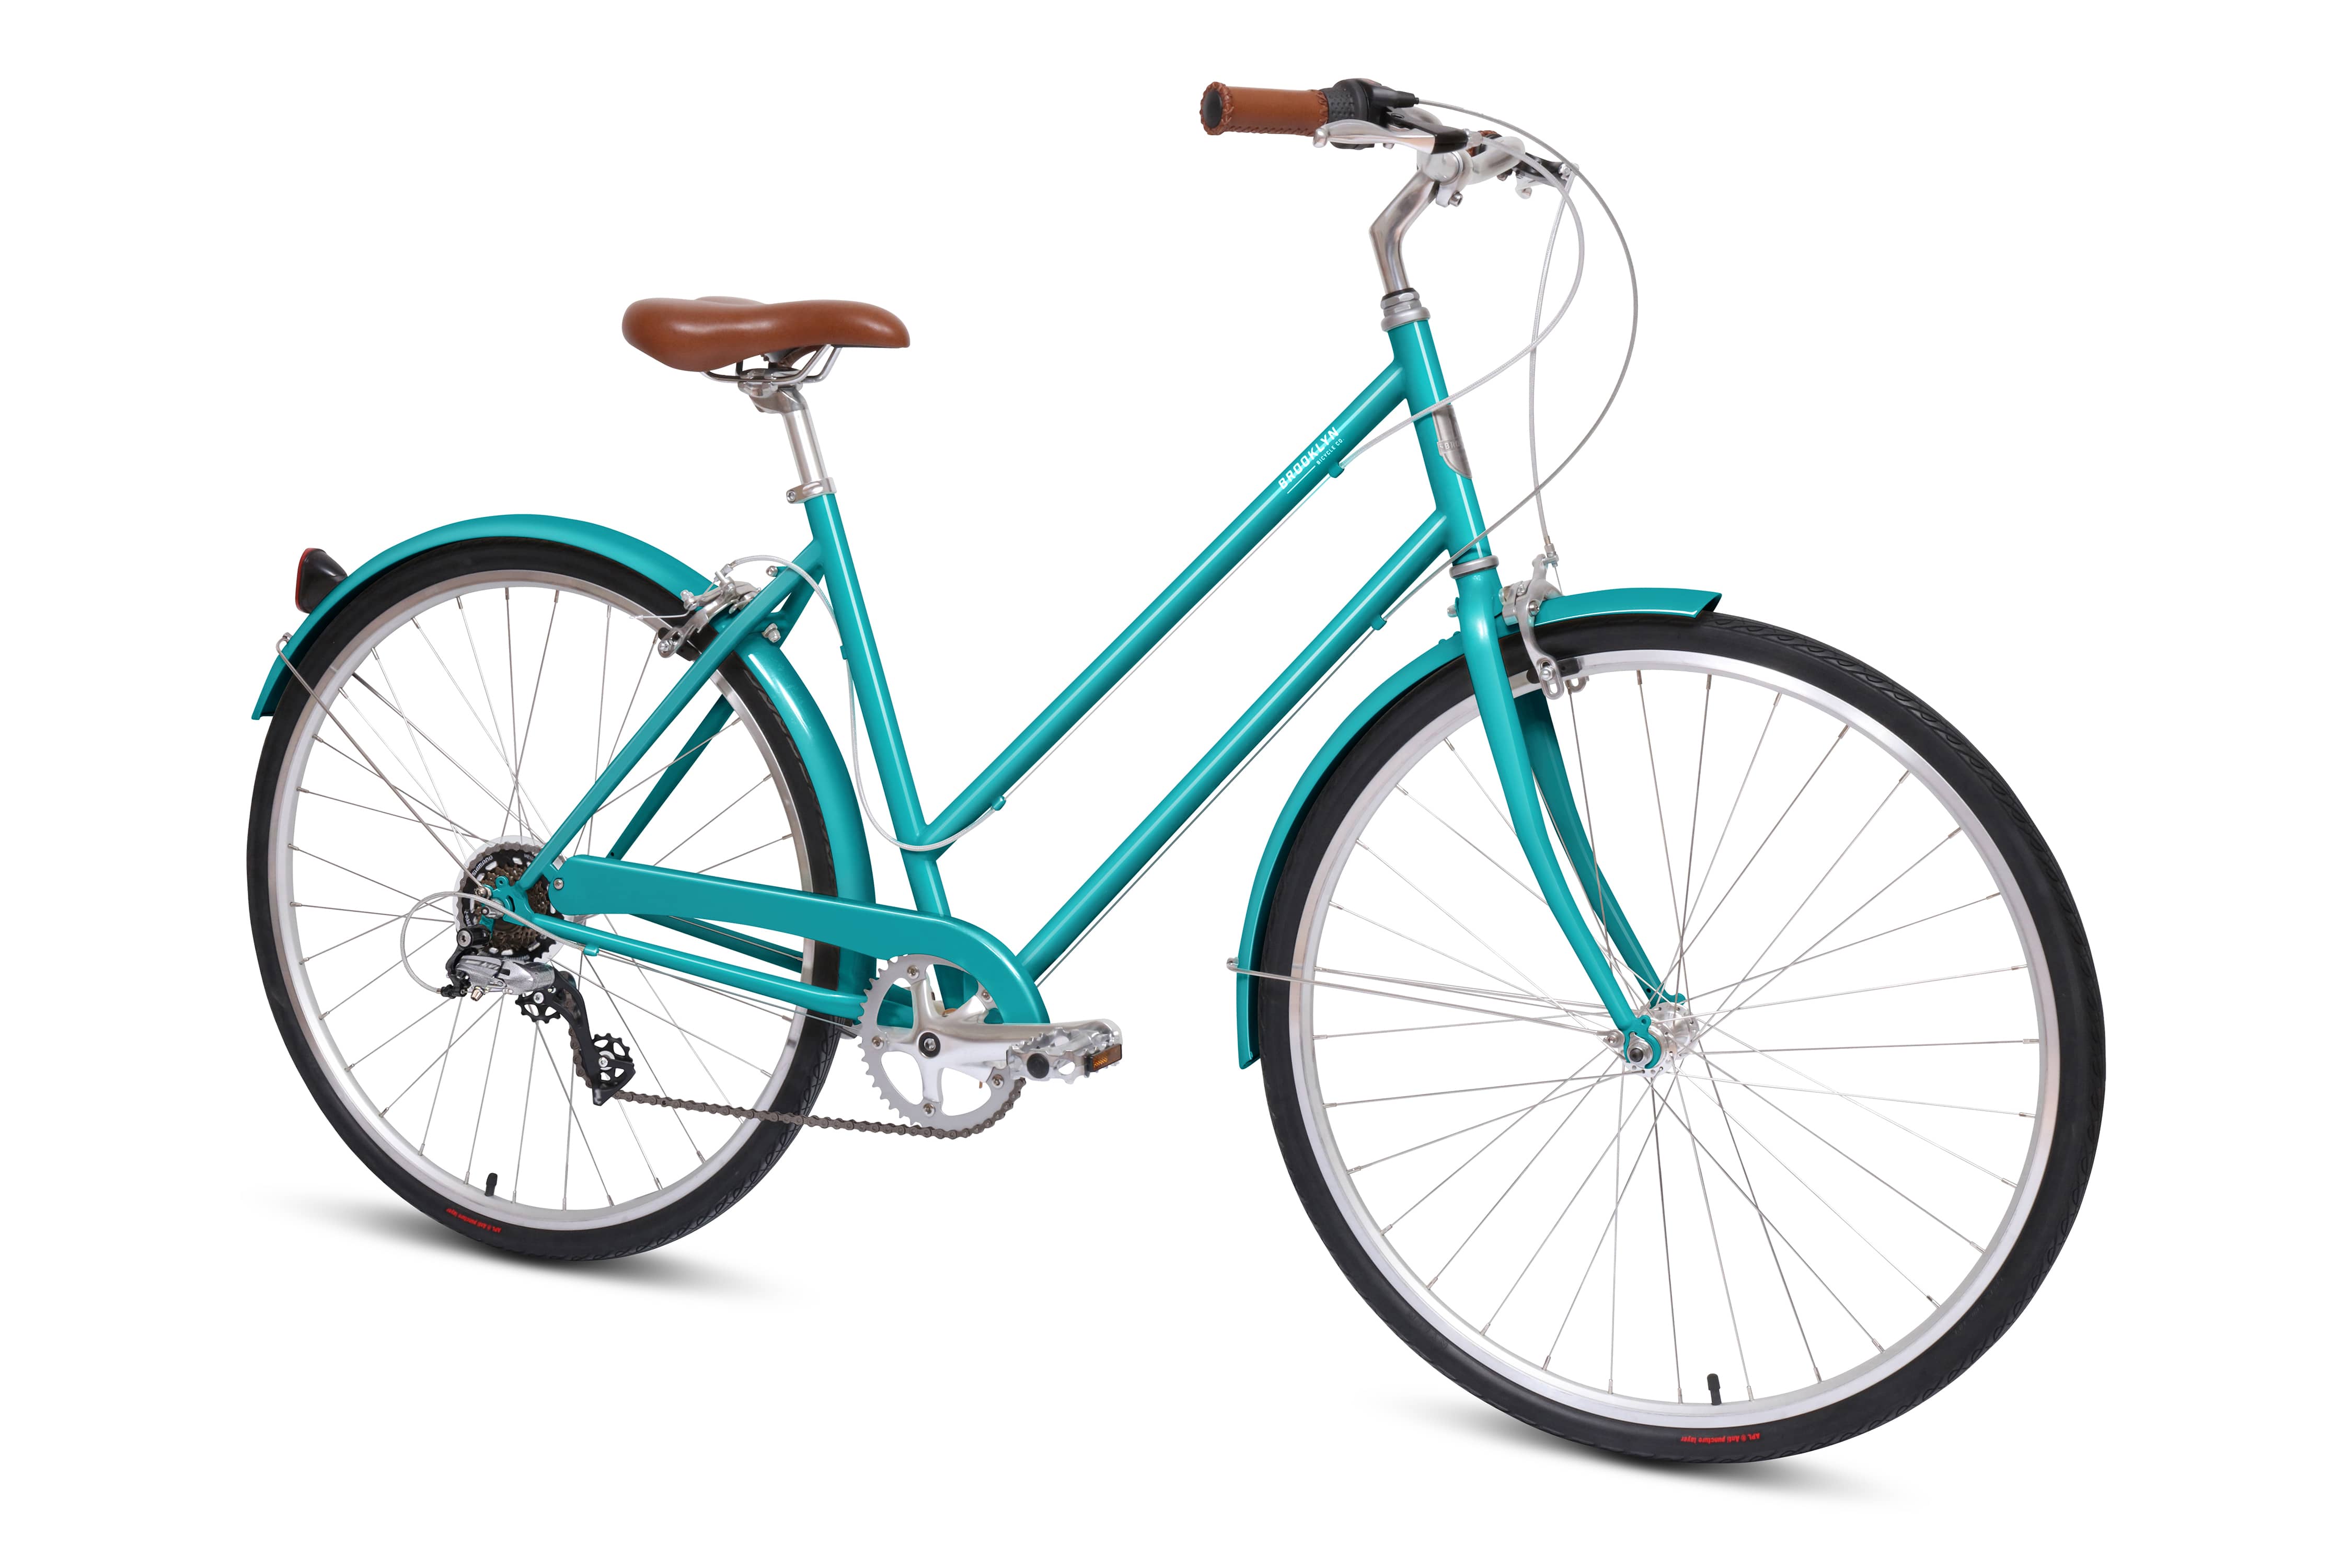 8 Speed Step Through Bicycle, Franklin Eight City Cruiser